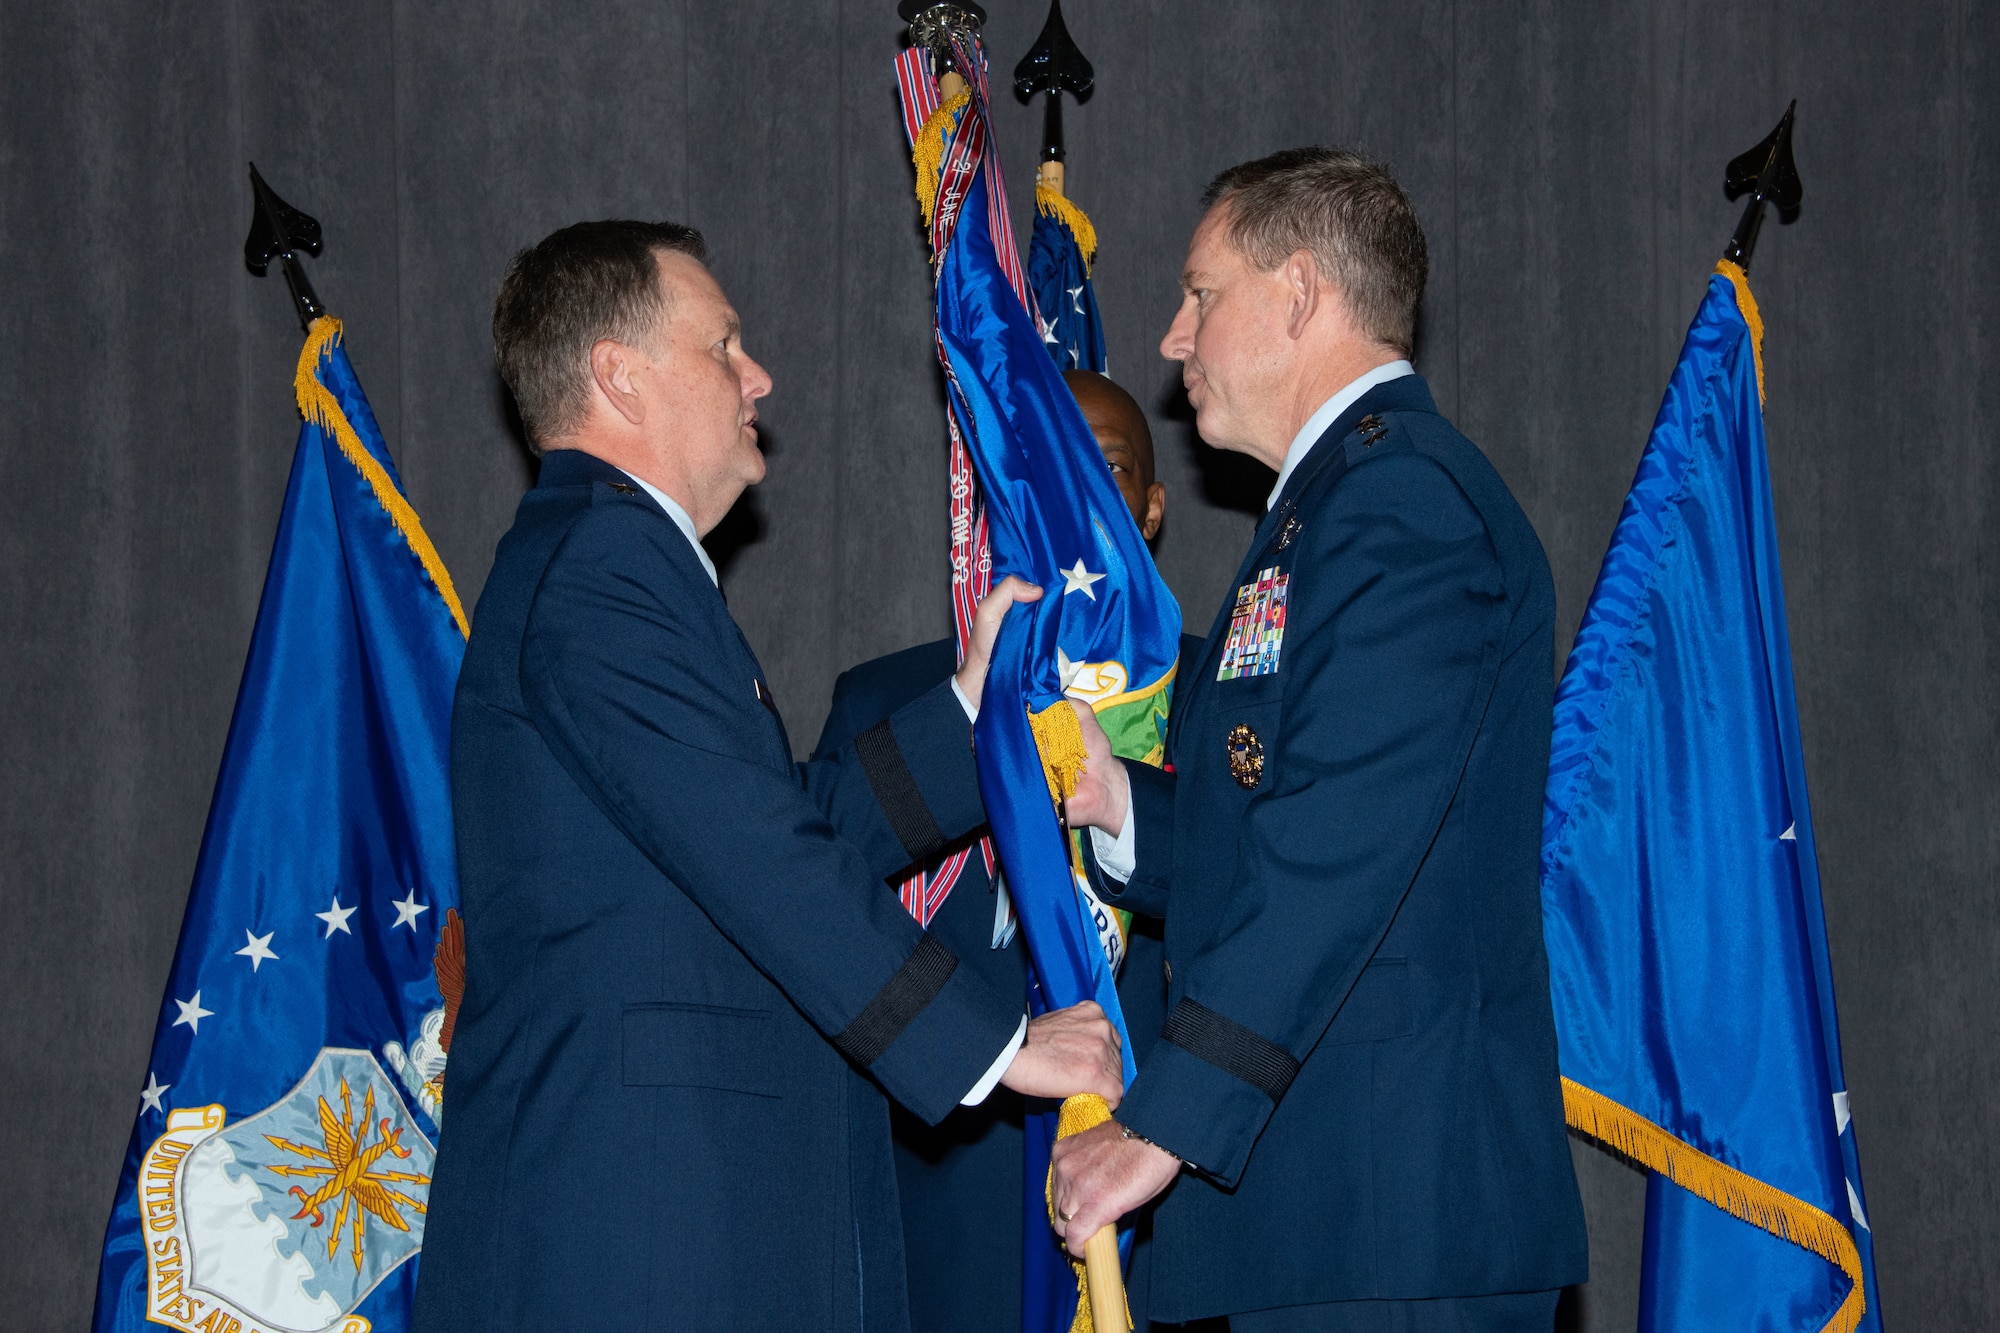 Lt. Gen. Brad Webb, commander of Air Education and Training Command, passes the guidon to Lt. Gen. James B. Hecker during an assumption of command ceremony in which Hecker takes over as the commander and president of Air University Nov. 22, 2019, at Maxwell Air Force Base, Alabama. The AU provides full spectrum education, research and outreach at every level through professional military education, professional continuing education and academic degree granting.